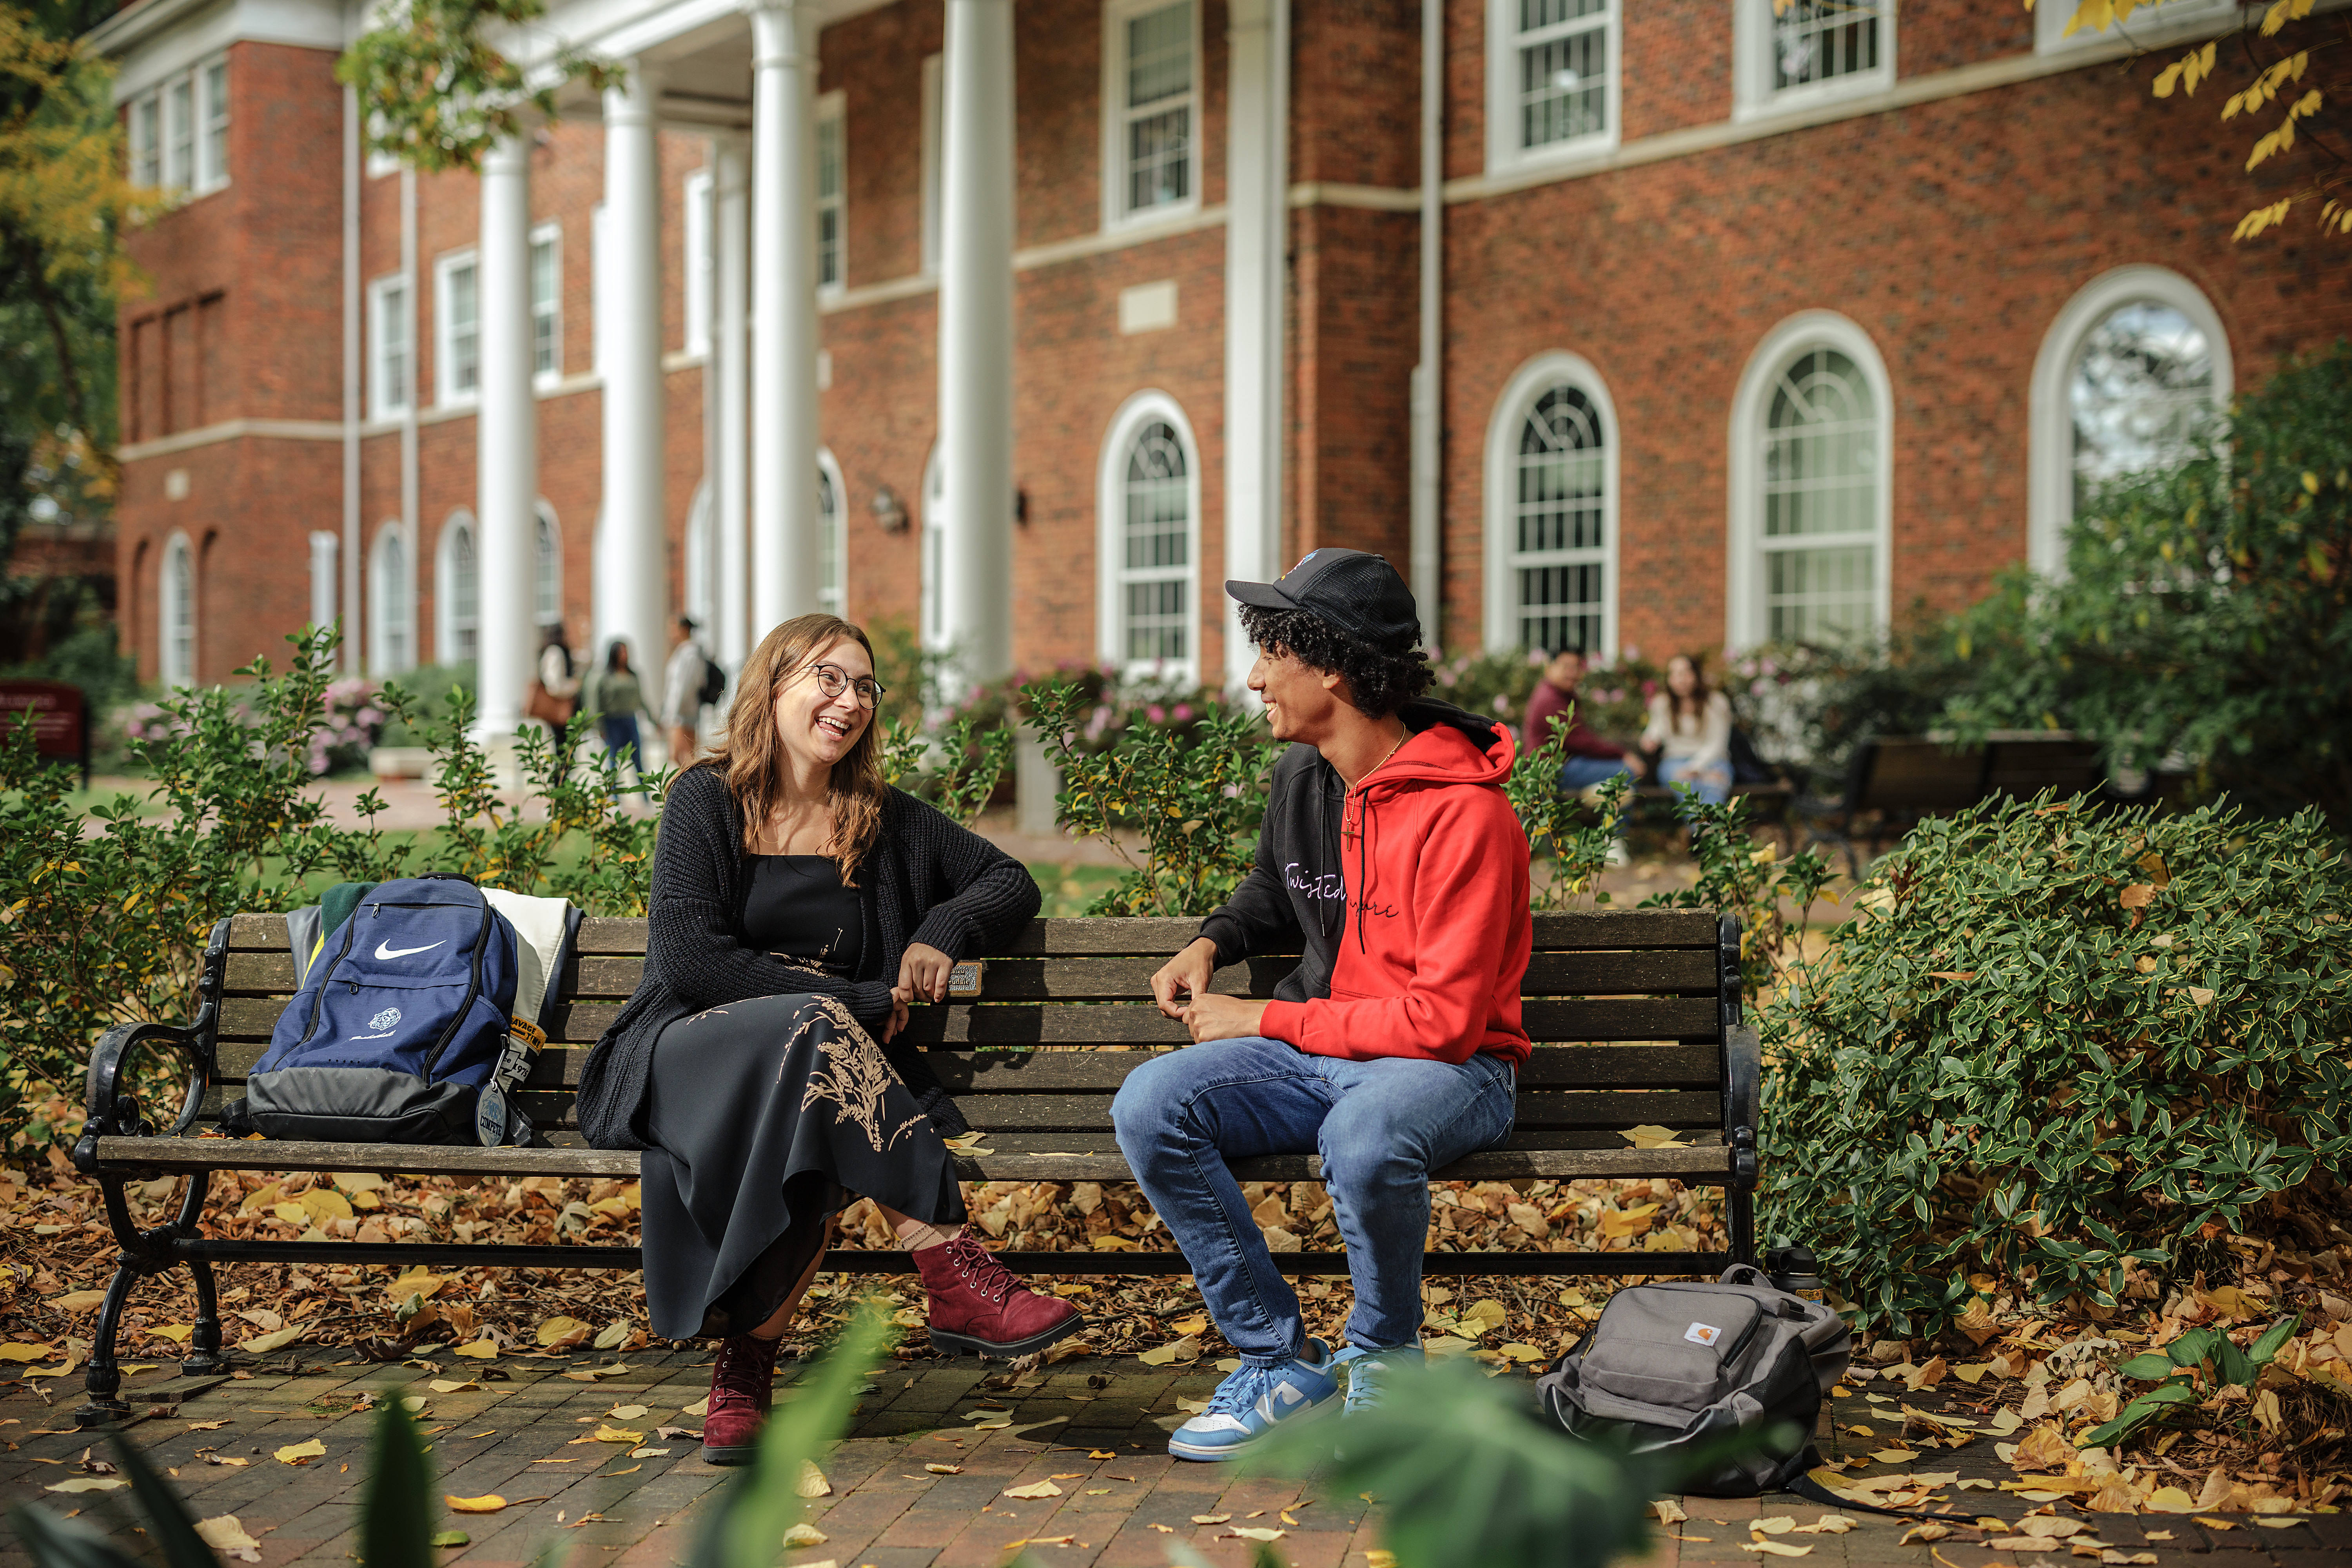 Students chat on a bench in the historic area of campus.